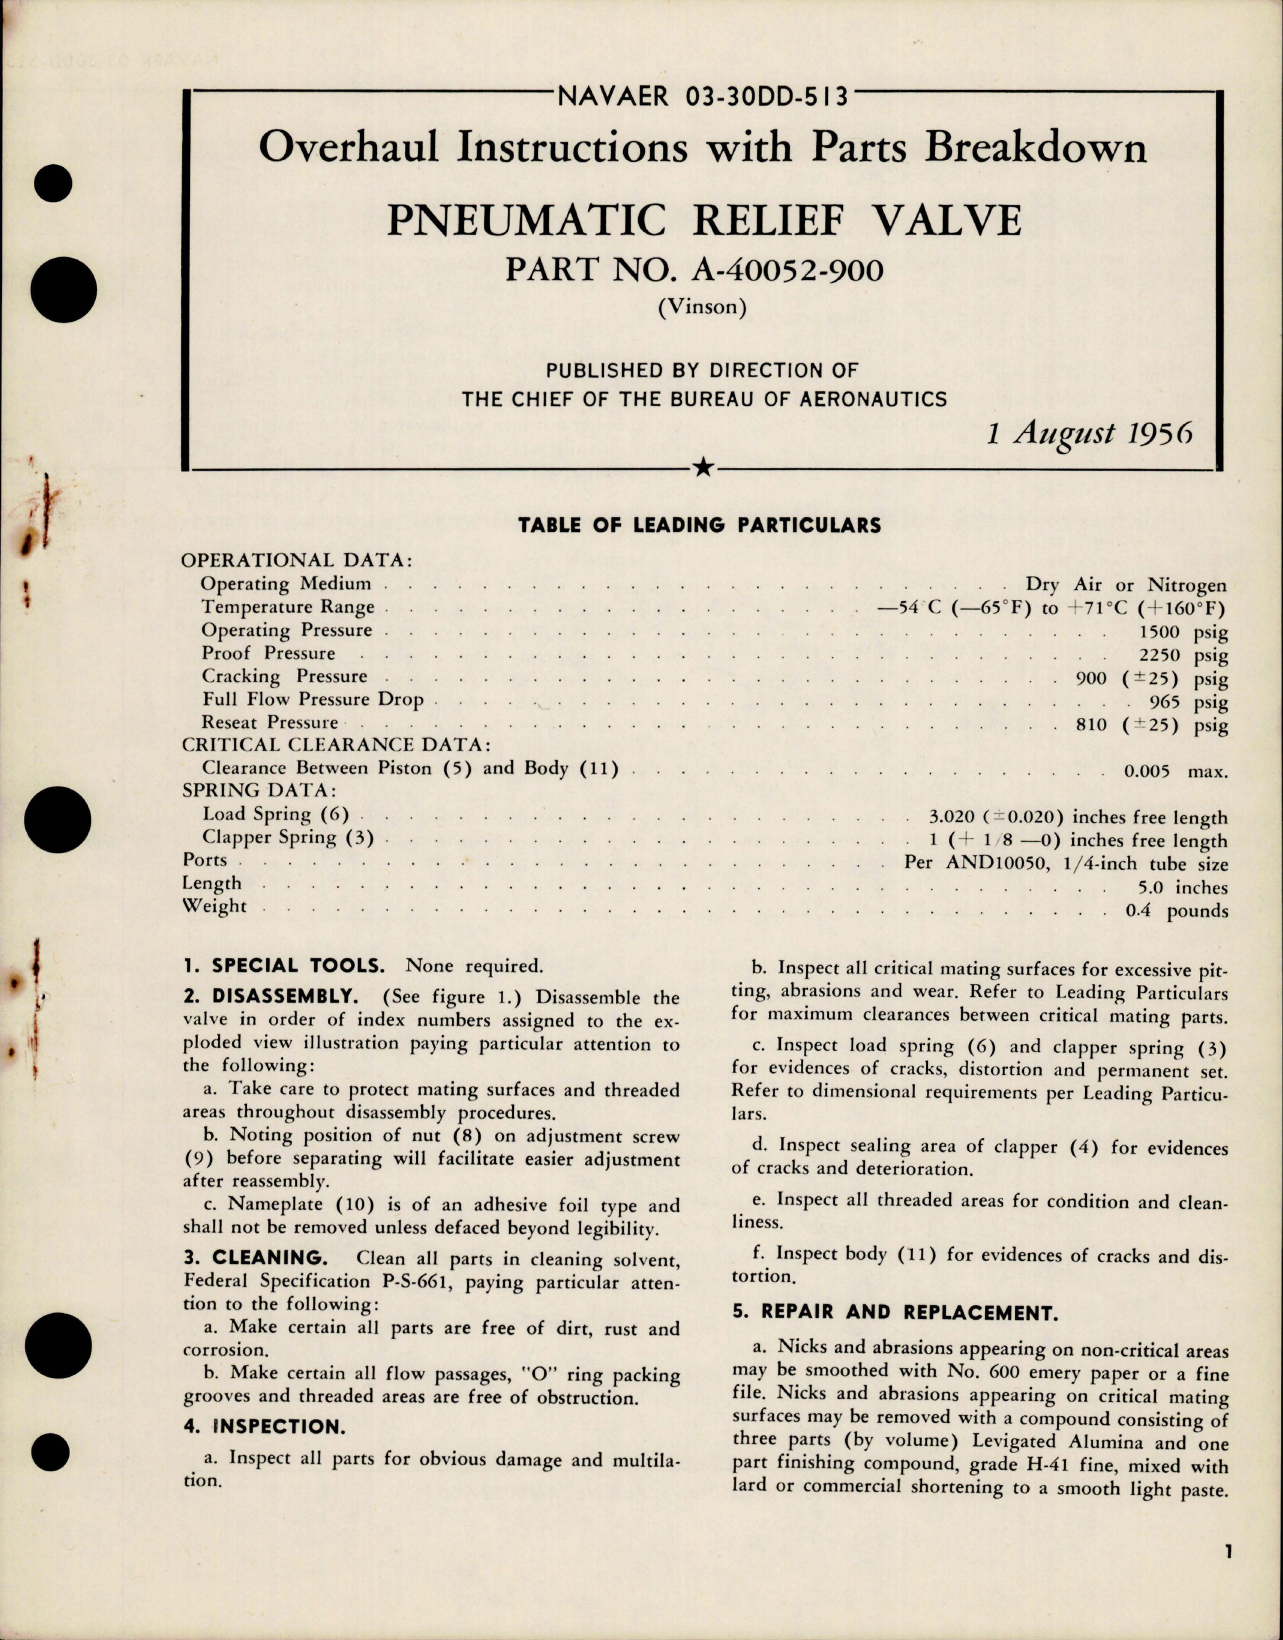 Sample page 1 from AirCorps Library document: Overhaul Instructions with Parts Breakdown for Pneumatic Relief Valve - Part A-40052-900